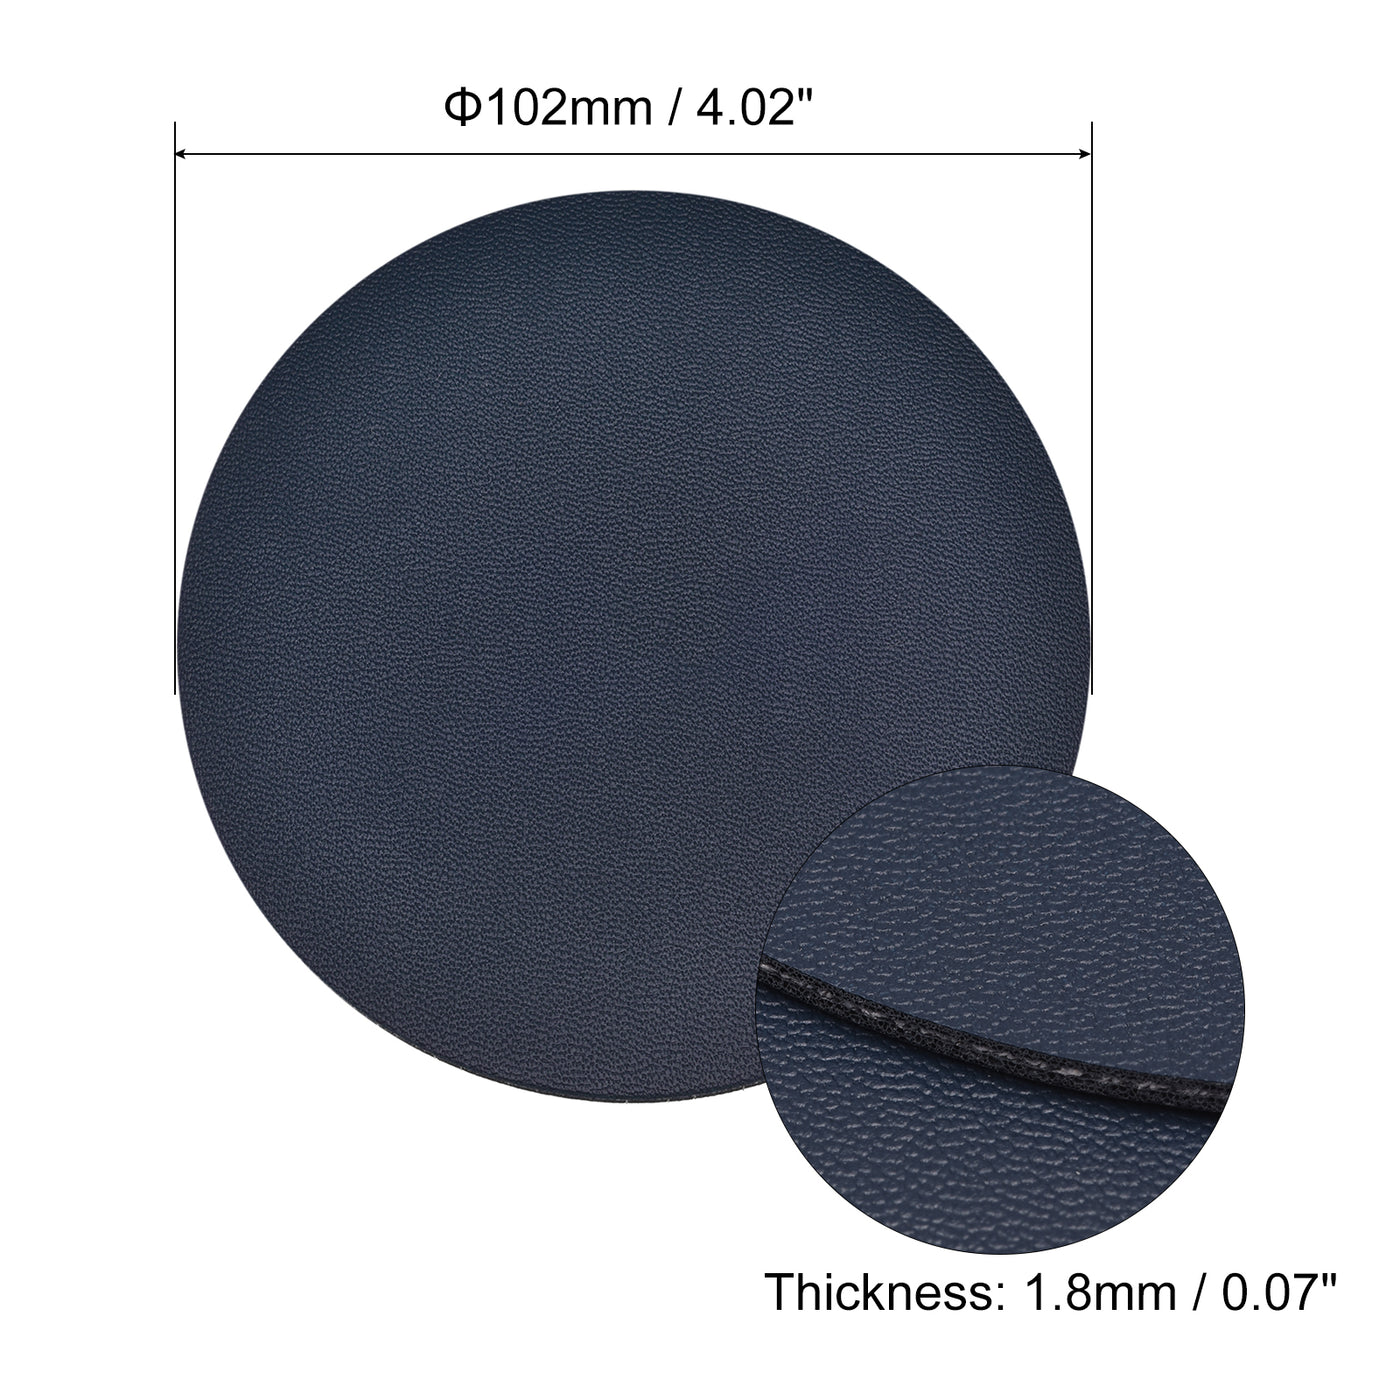 uxcell Uxcell 102mm(4.02") Round Coasters PU Cup Mat Pad for Tableware Dark Blue 2pcs